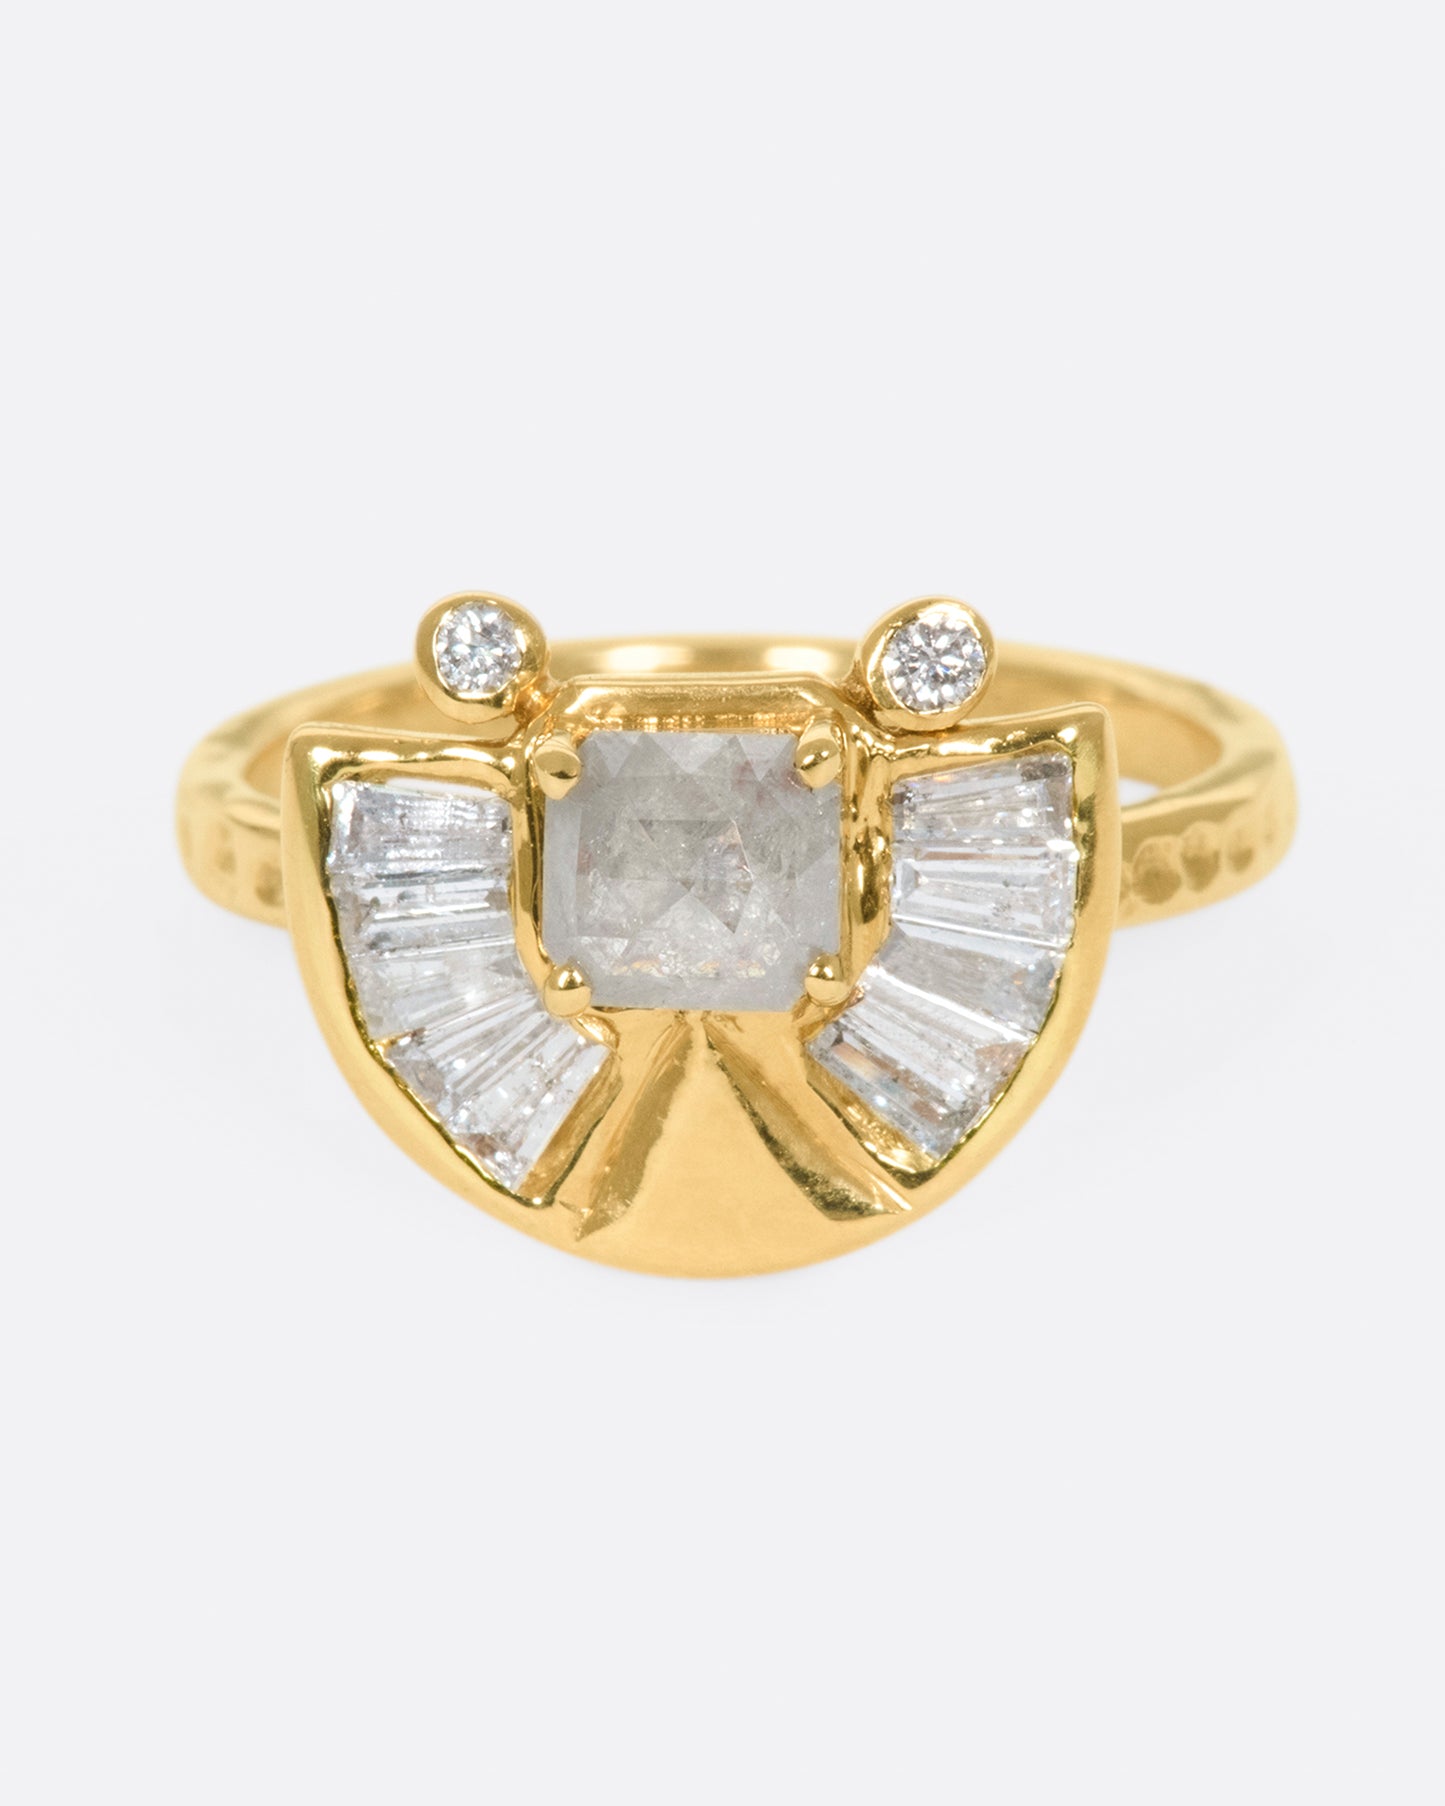 A textured gold ring with a rose cut salt & pepper diamond at its center surrounded by round and baguette diamond accents.